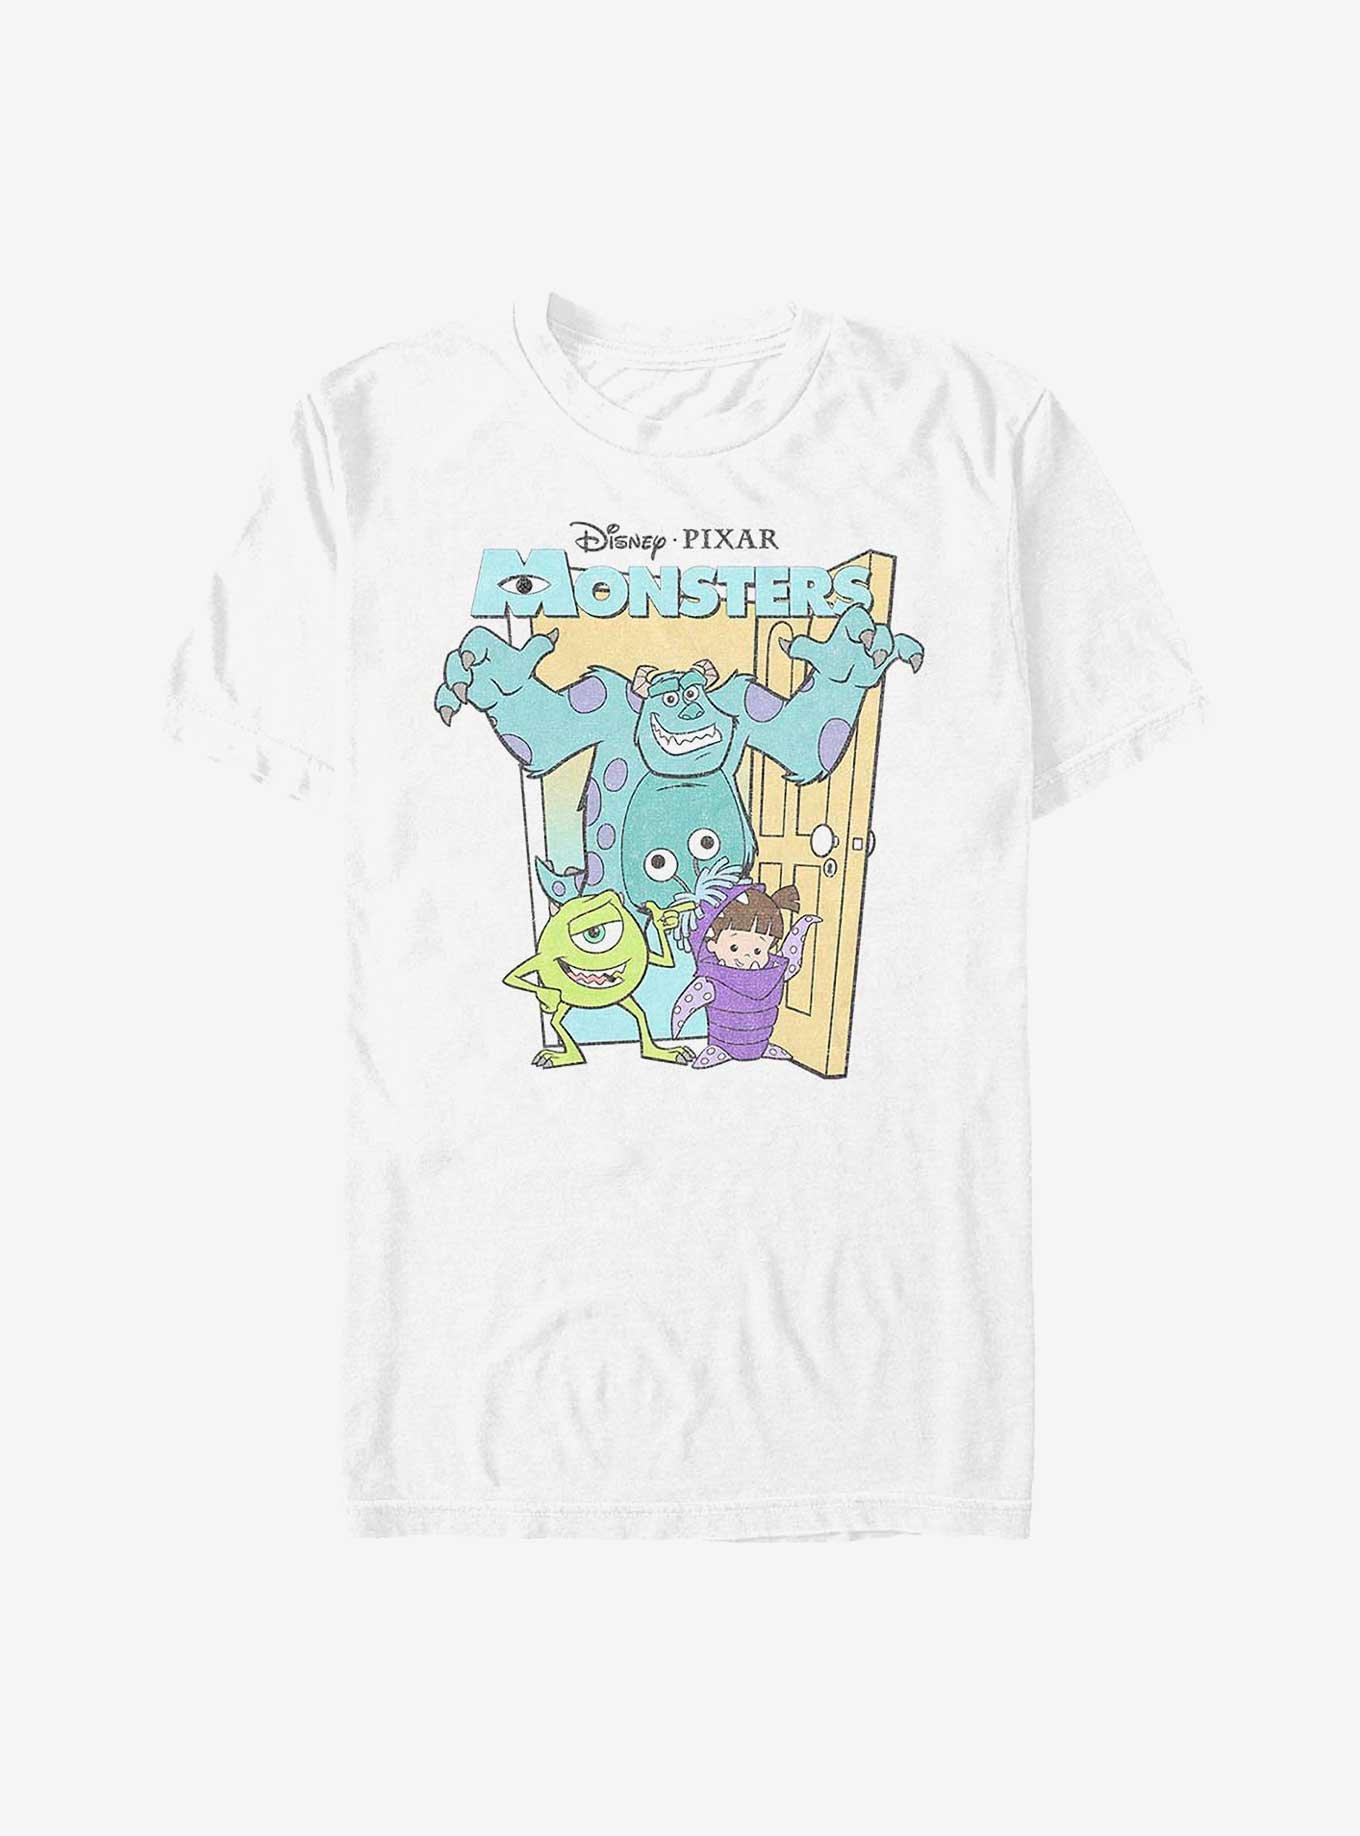 Disney Pixar Monsters Inc. Mike, Sulley, and Boo Poster T-Shirt - WHITE ...